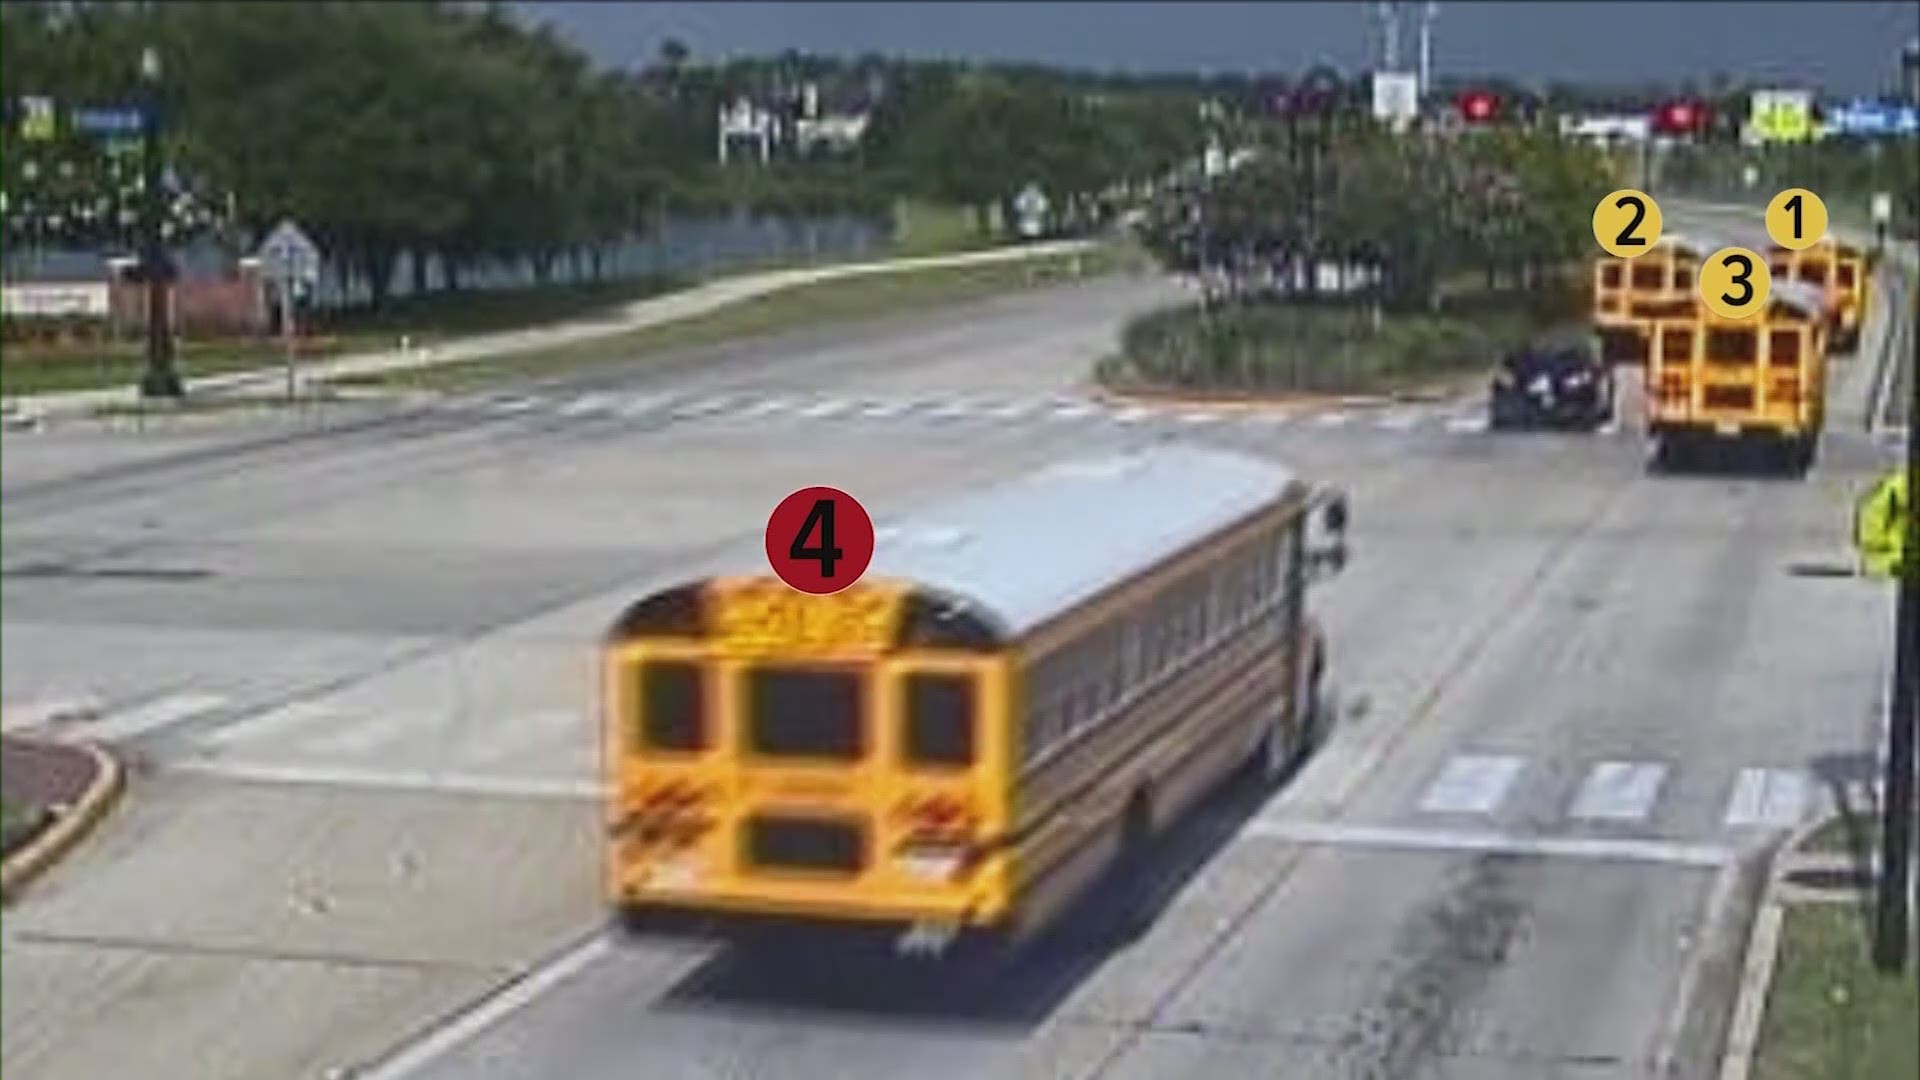 KHOU 11 Investigates found three dozen red light tickets were issued to bus drivers at three separate Houston-area school districts.